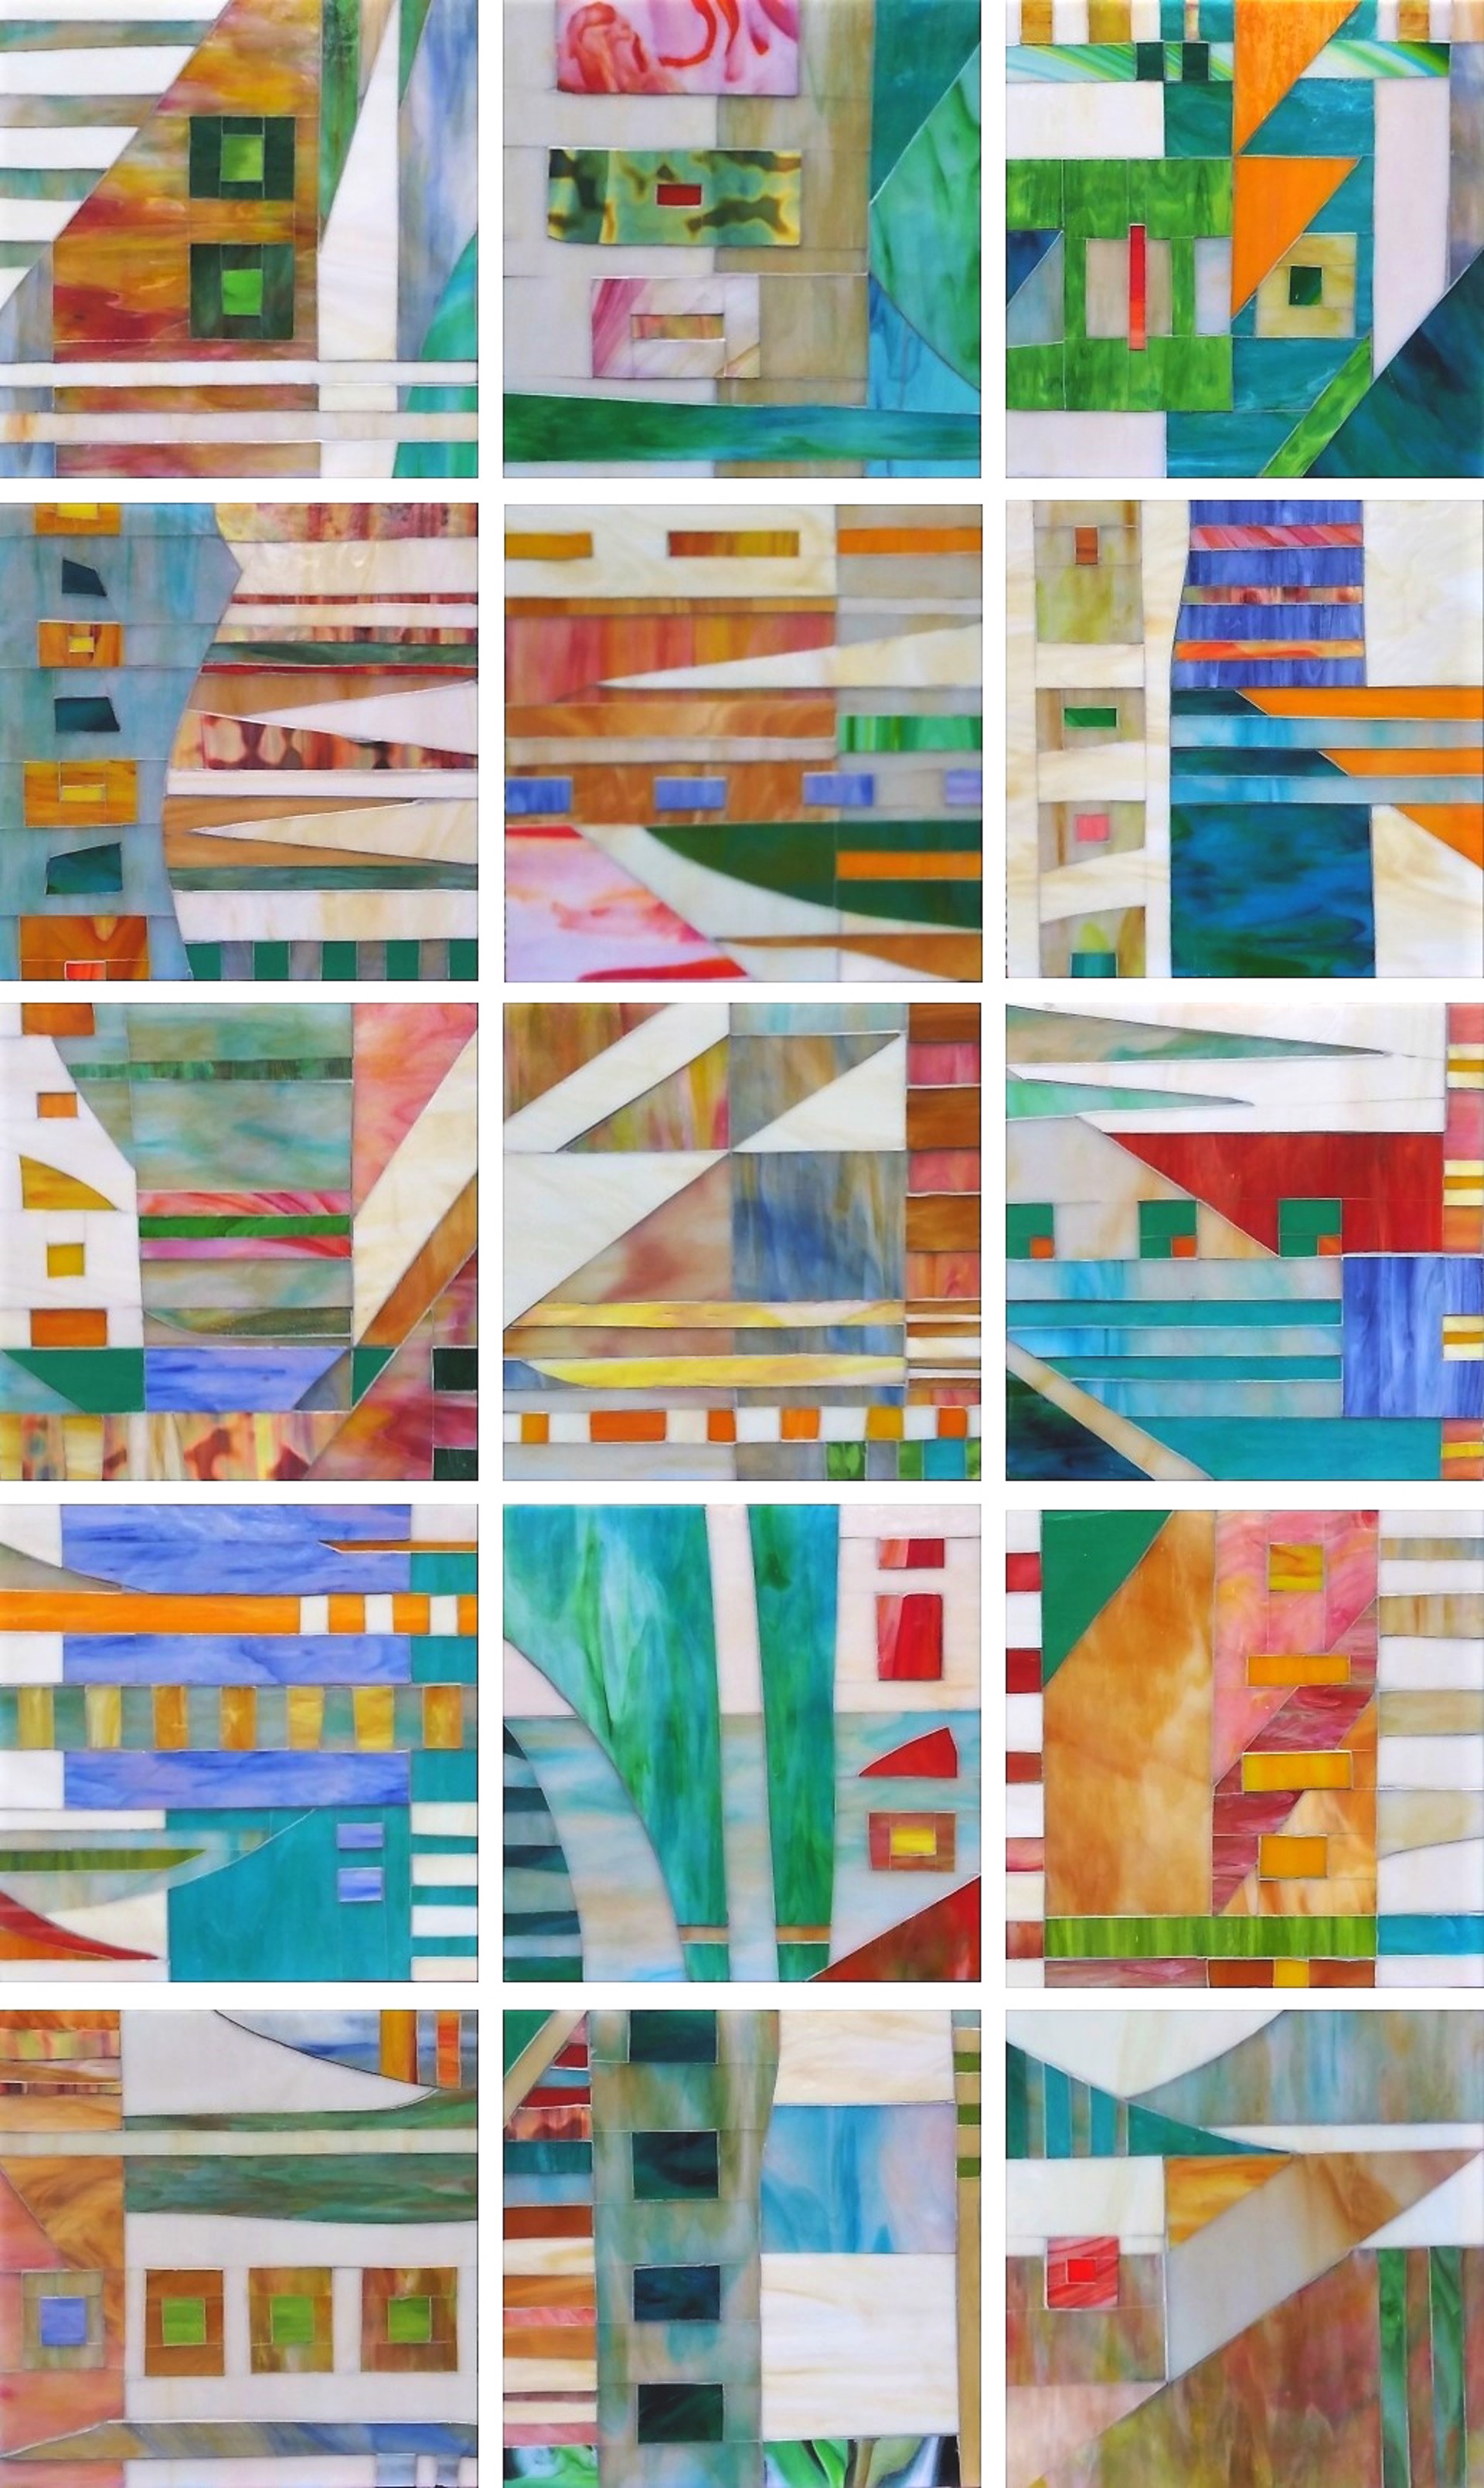 Excursion (8 Panels) by Mary Borgen